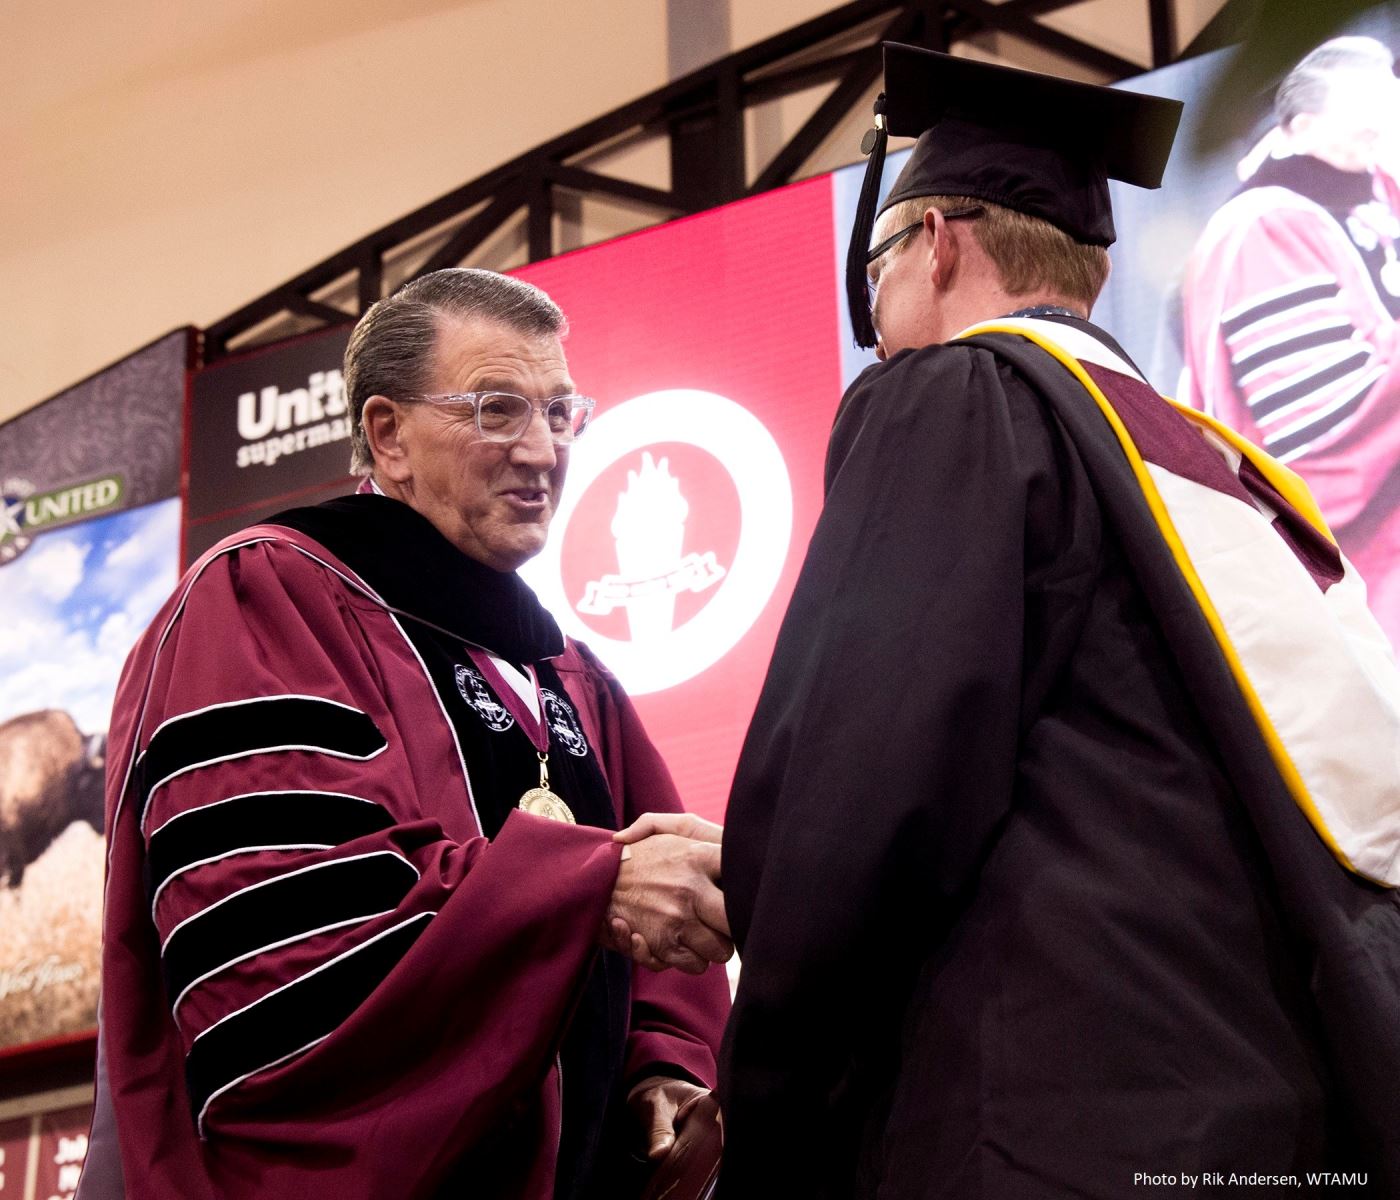 President Wendler shaking hand of graduate at commencement